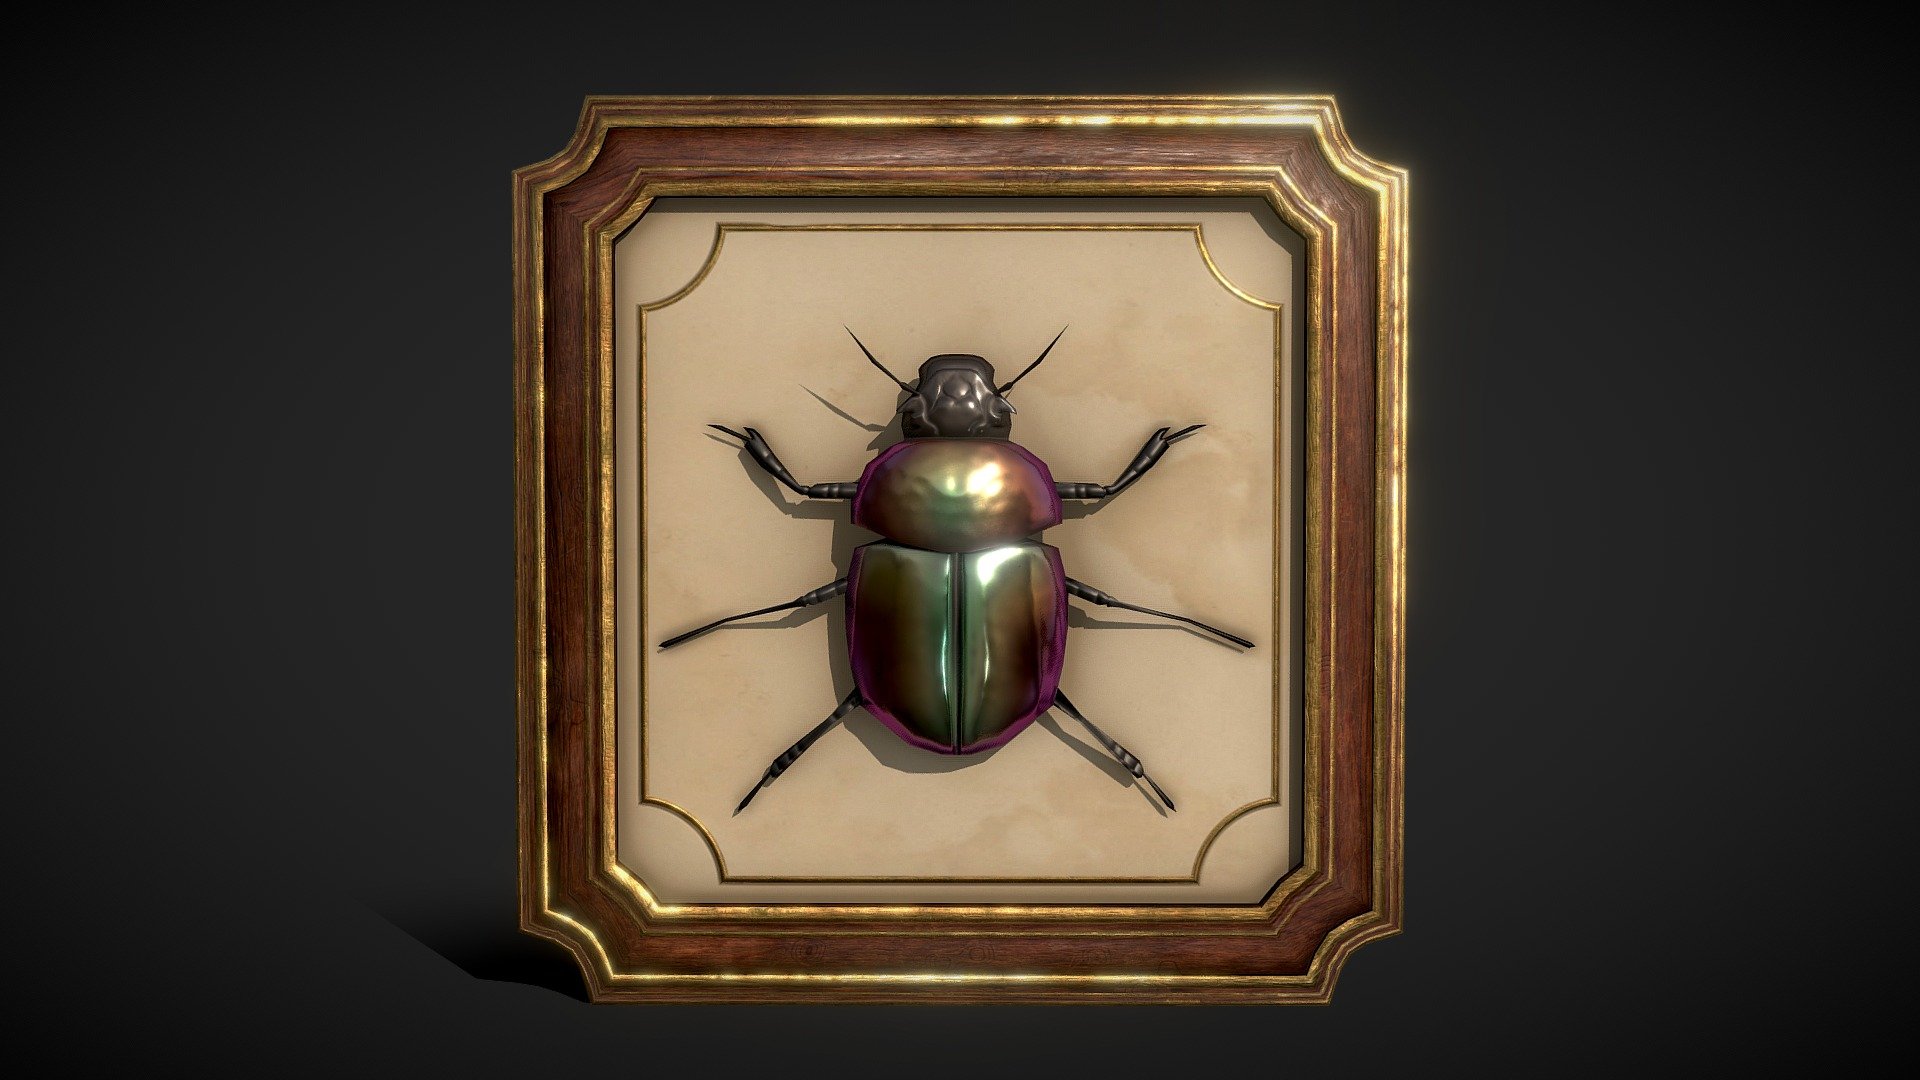 Framed Beetle Decoration - low poly

Triangles: 1.6k
Vertices: 824

4096x4096 PNG texture - Framed Beetle / Bug Decoration - low poly - Buy Royalty Free 3D model by Karolina Renkiewicz (@KarolinaRenkiewicz) 3d model